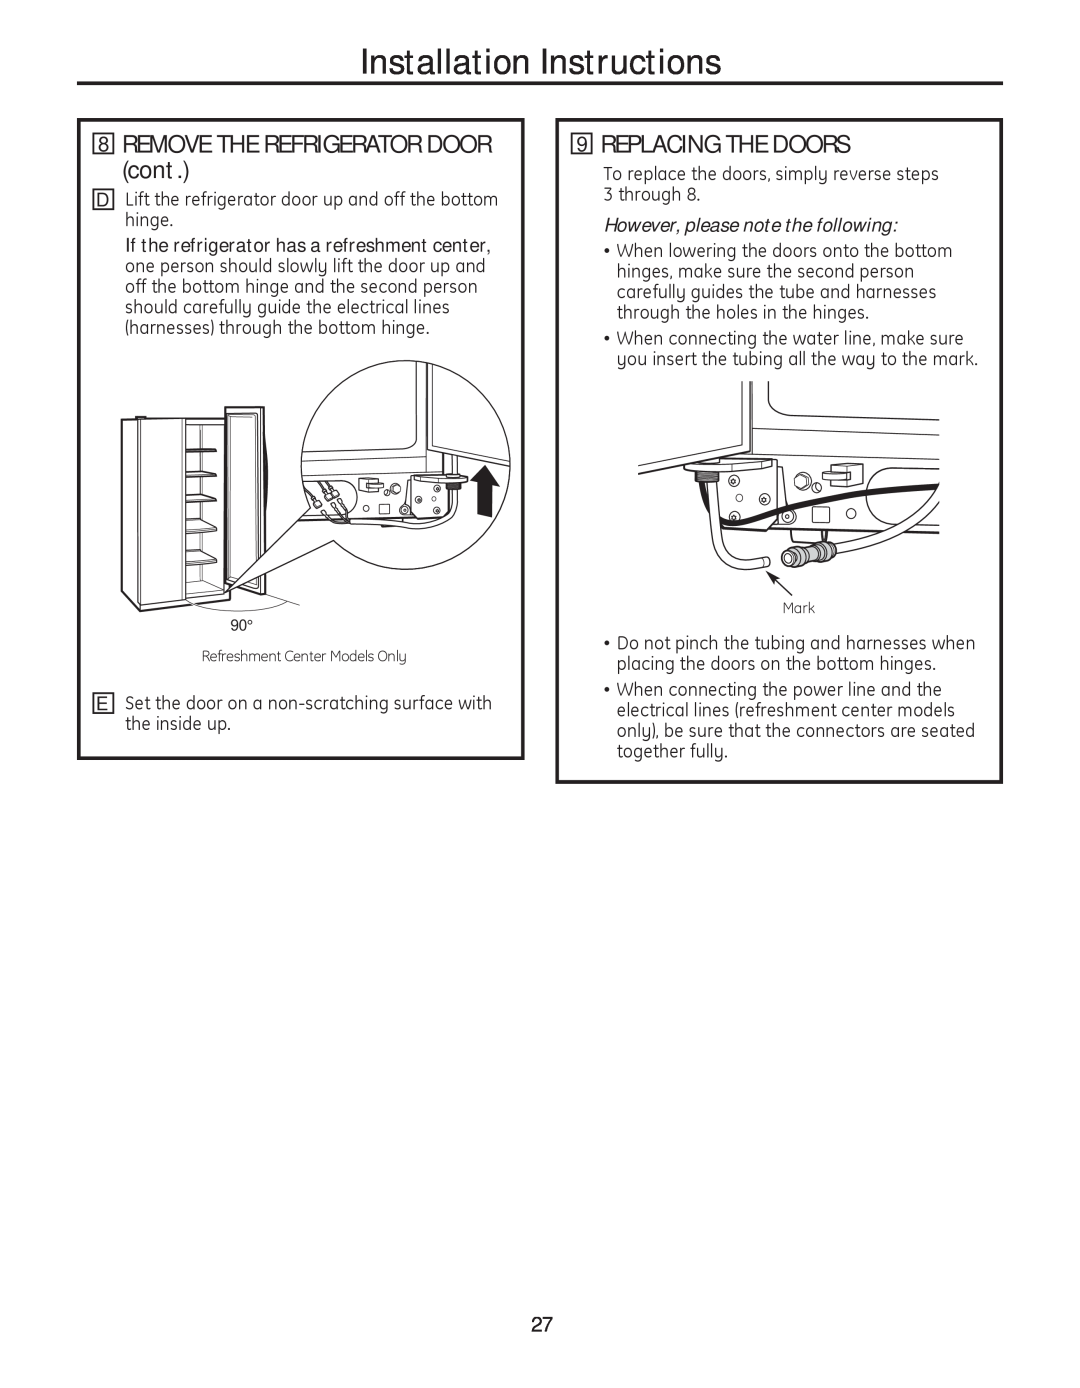 GE 200D8074P050 Replacing The Doors, However, please note the following, Installation Instructions, Mark 